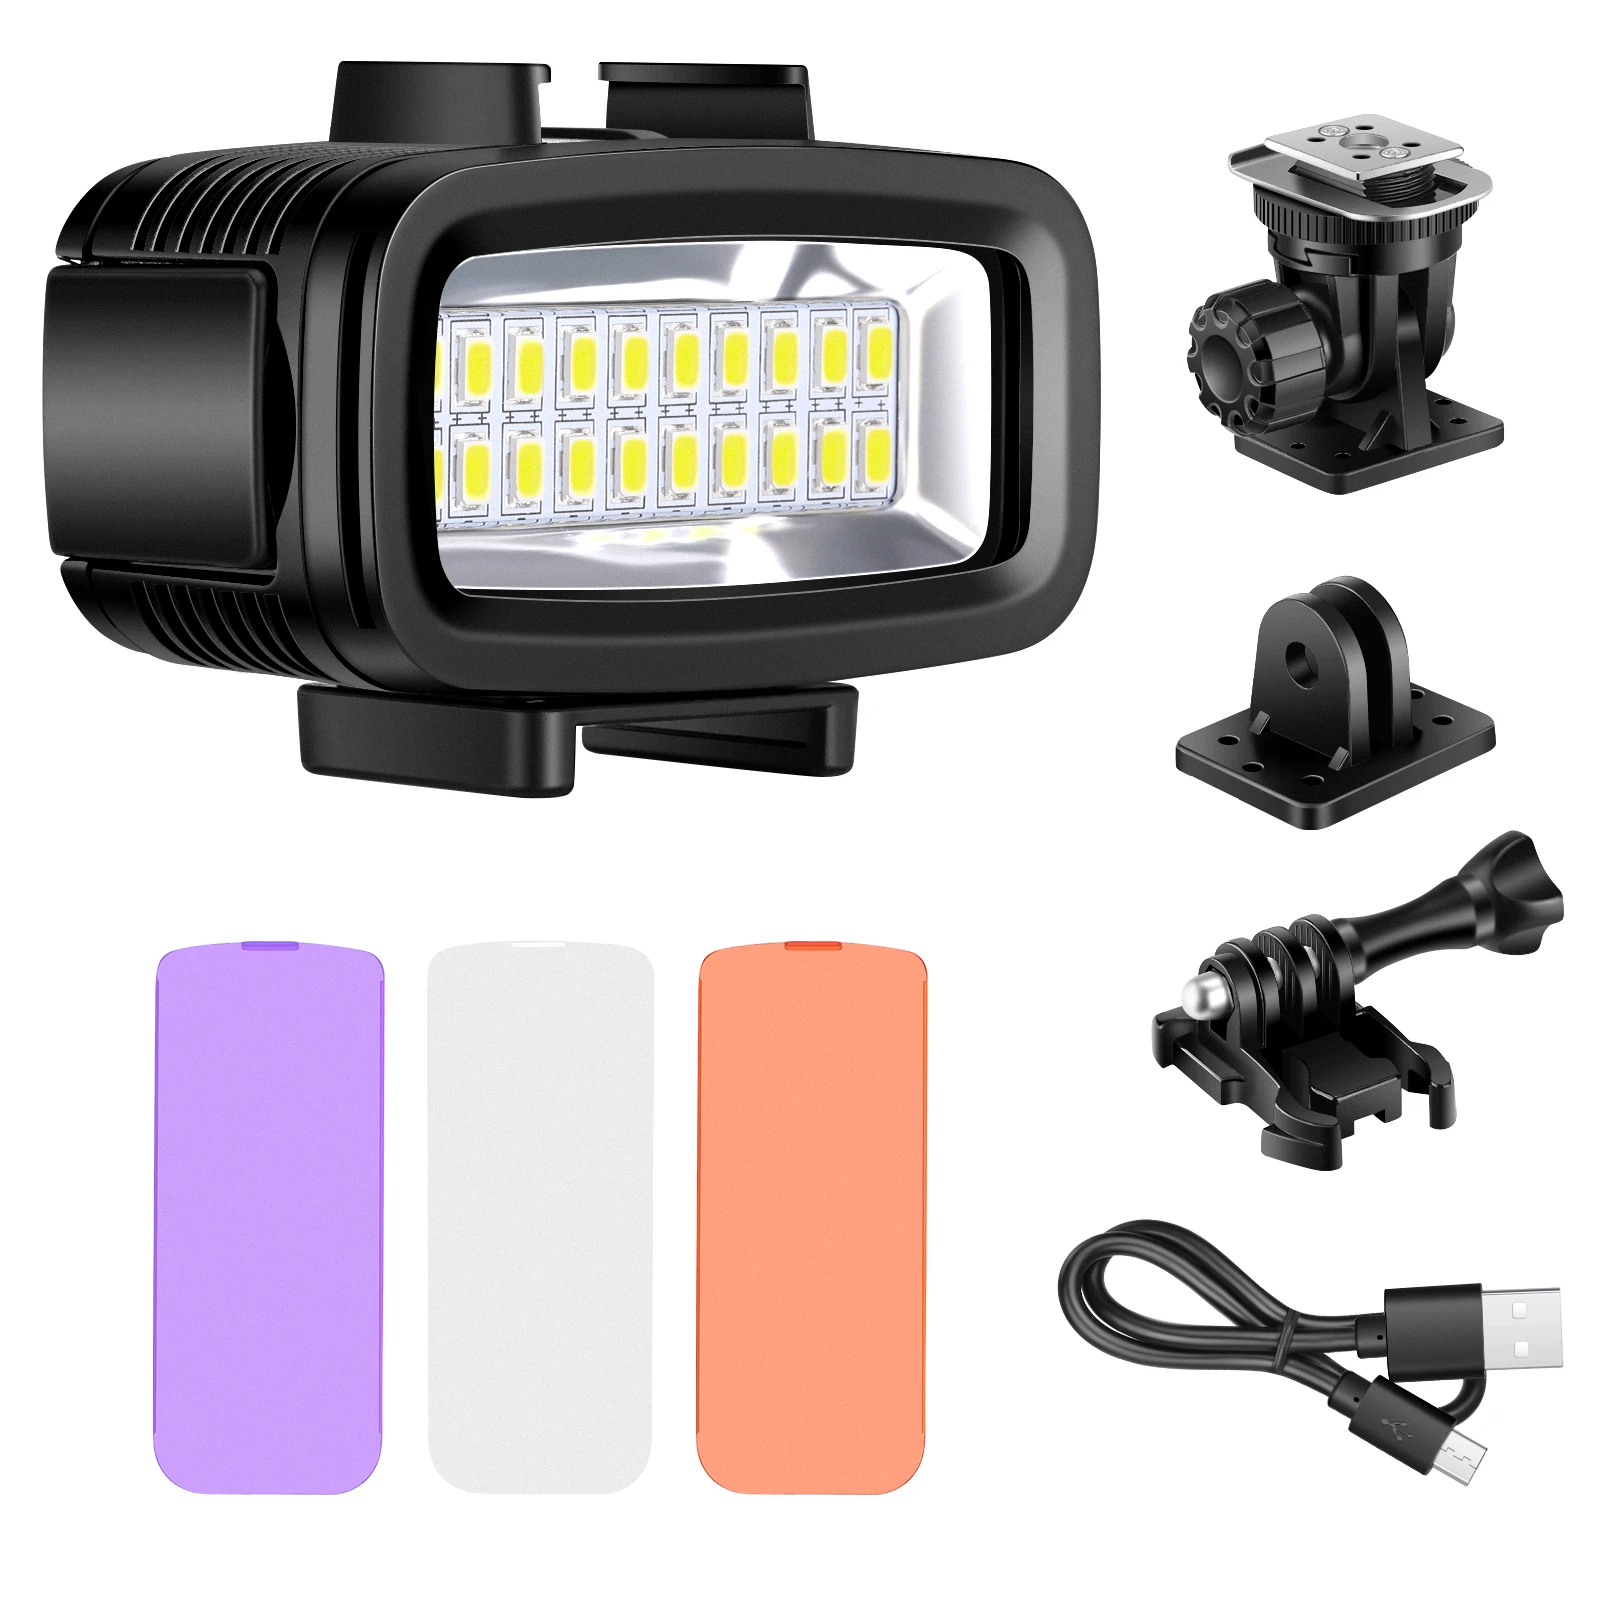 Underwater 20 LED 700LM Flash Dimmable Fill Night Light with Color Filter for GoPro Hero 10 9 8 7 6 5 4 3+ Action Camera|video led video lightvideo light led - AliExpress